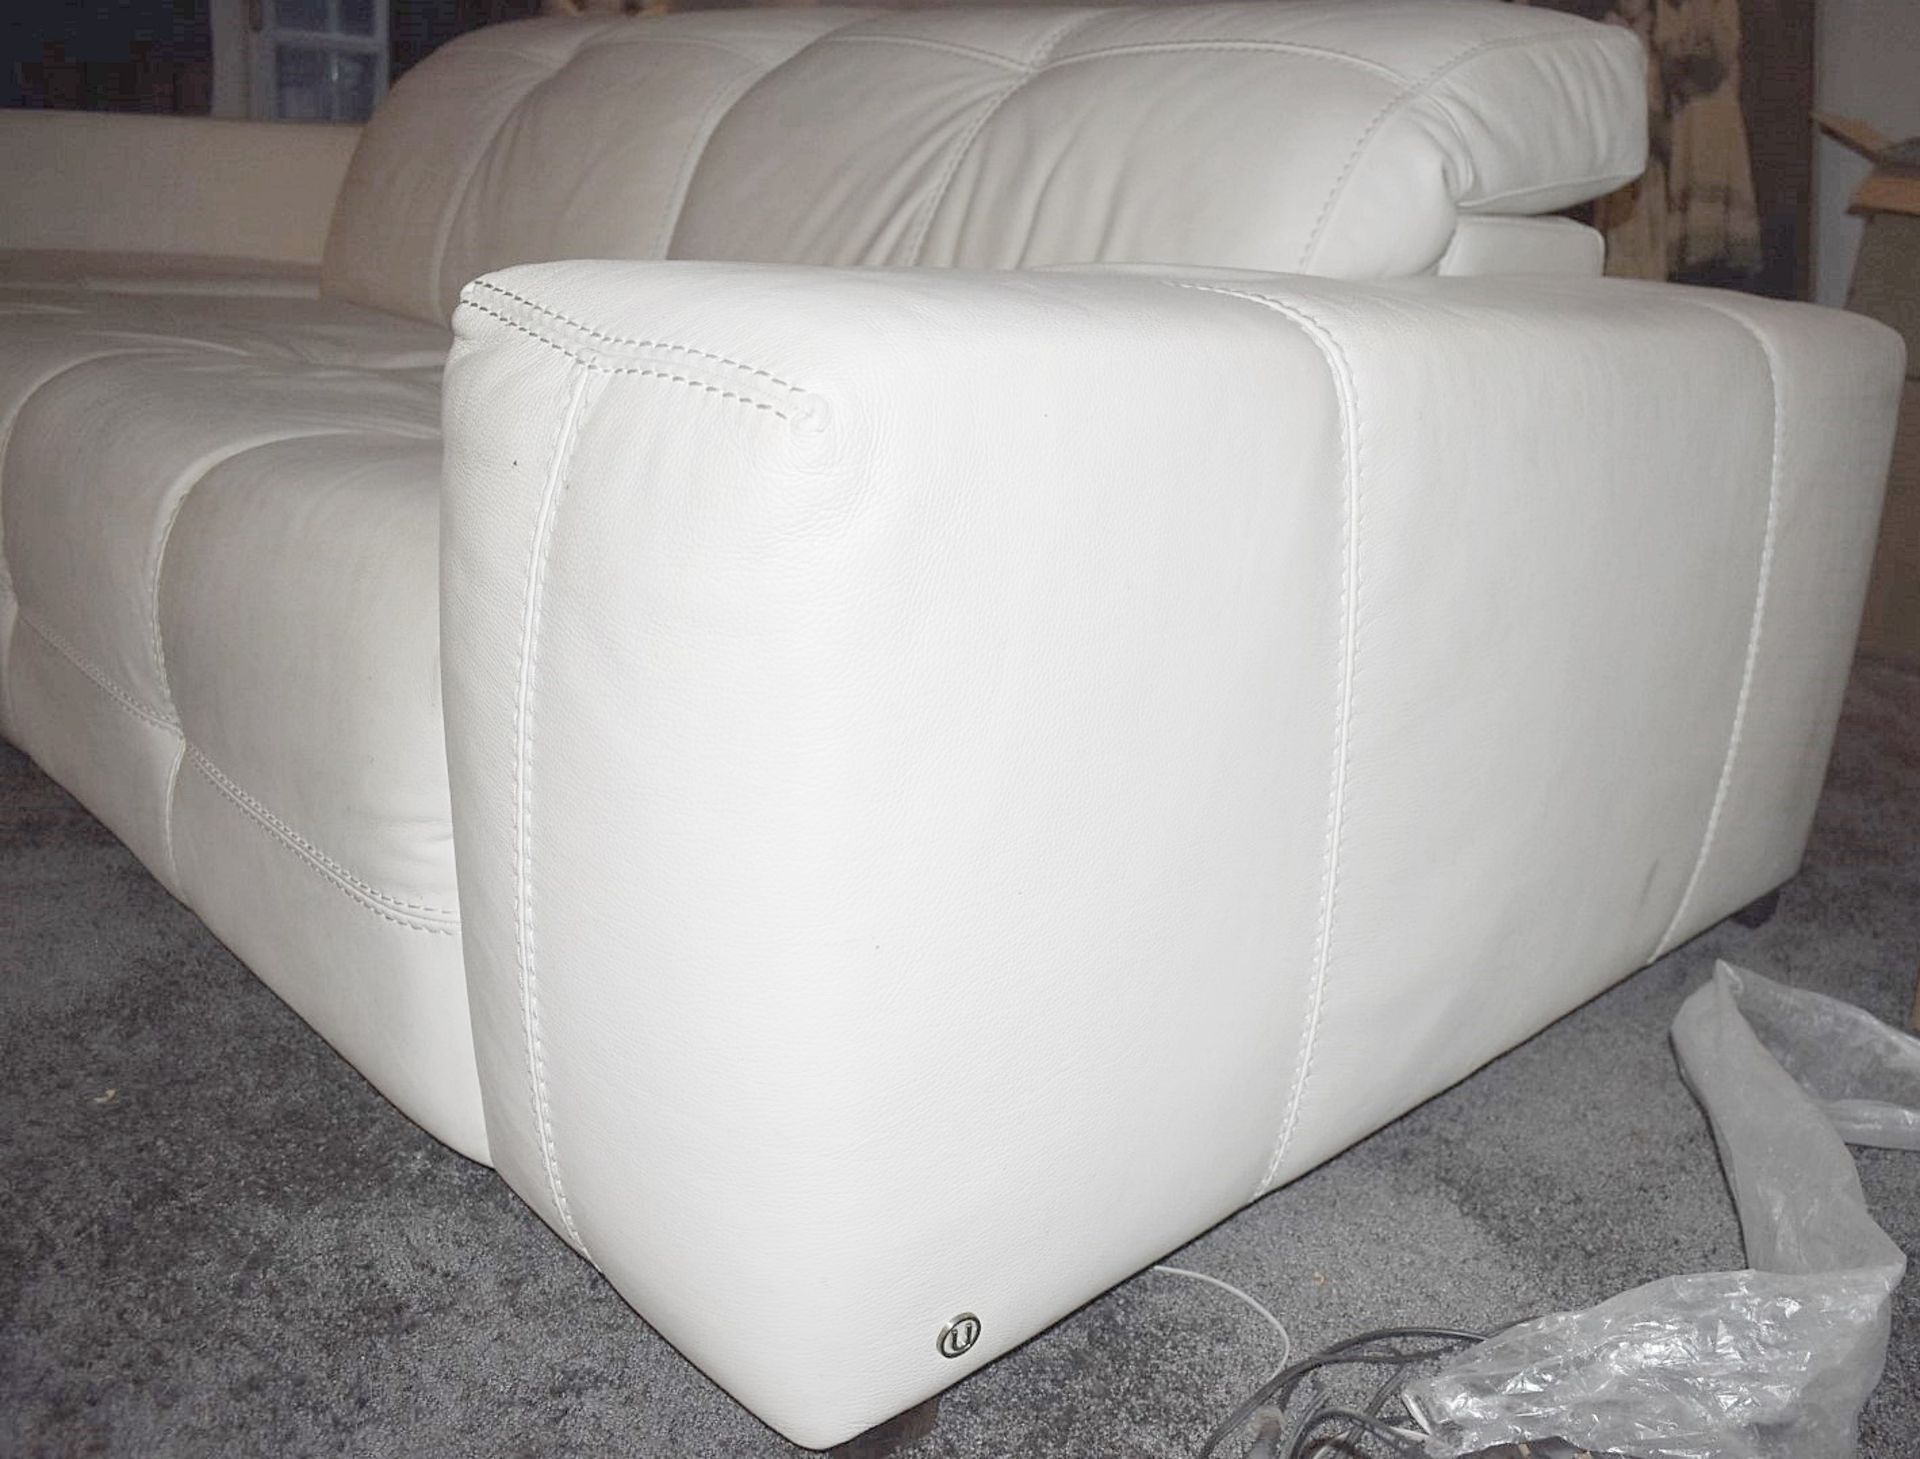 1 x NATUZZI Luxury White Leather Corner Sofa With Integrated Stereo Speakers And iPhone Dock - Cream - Image 3 of 13